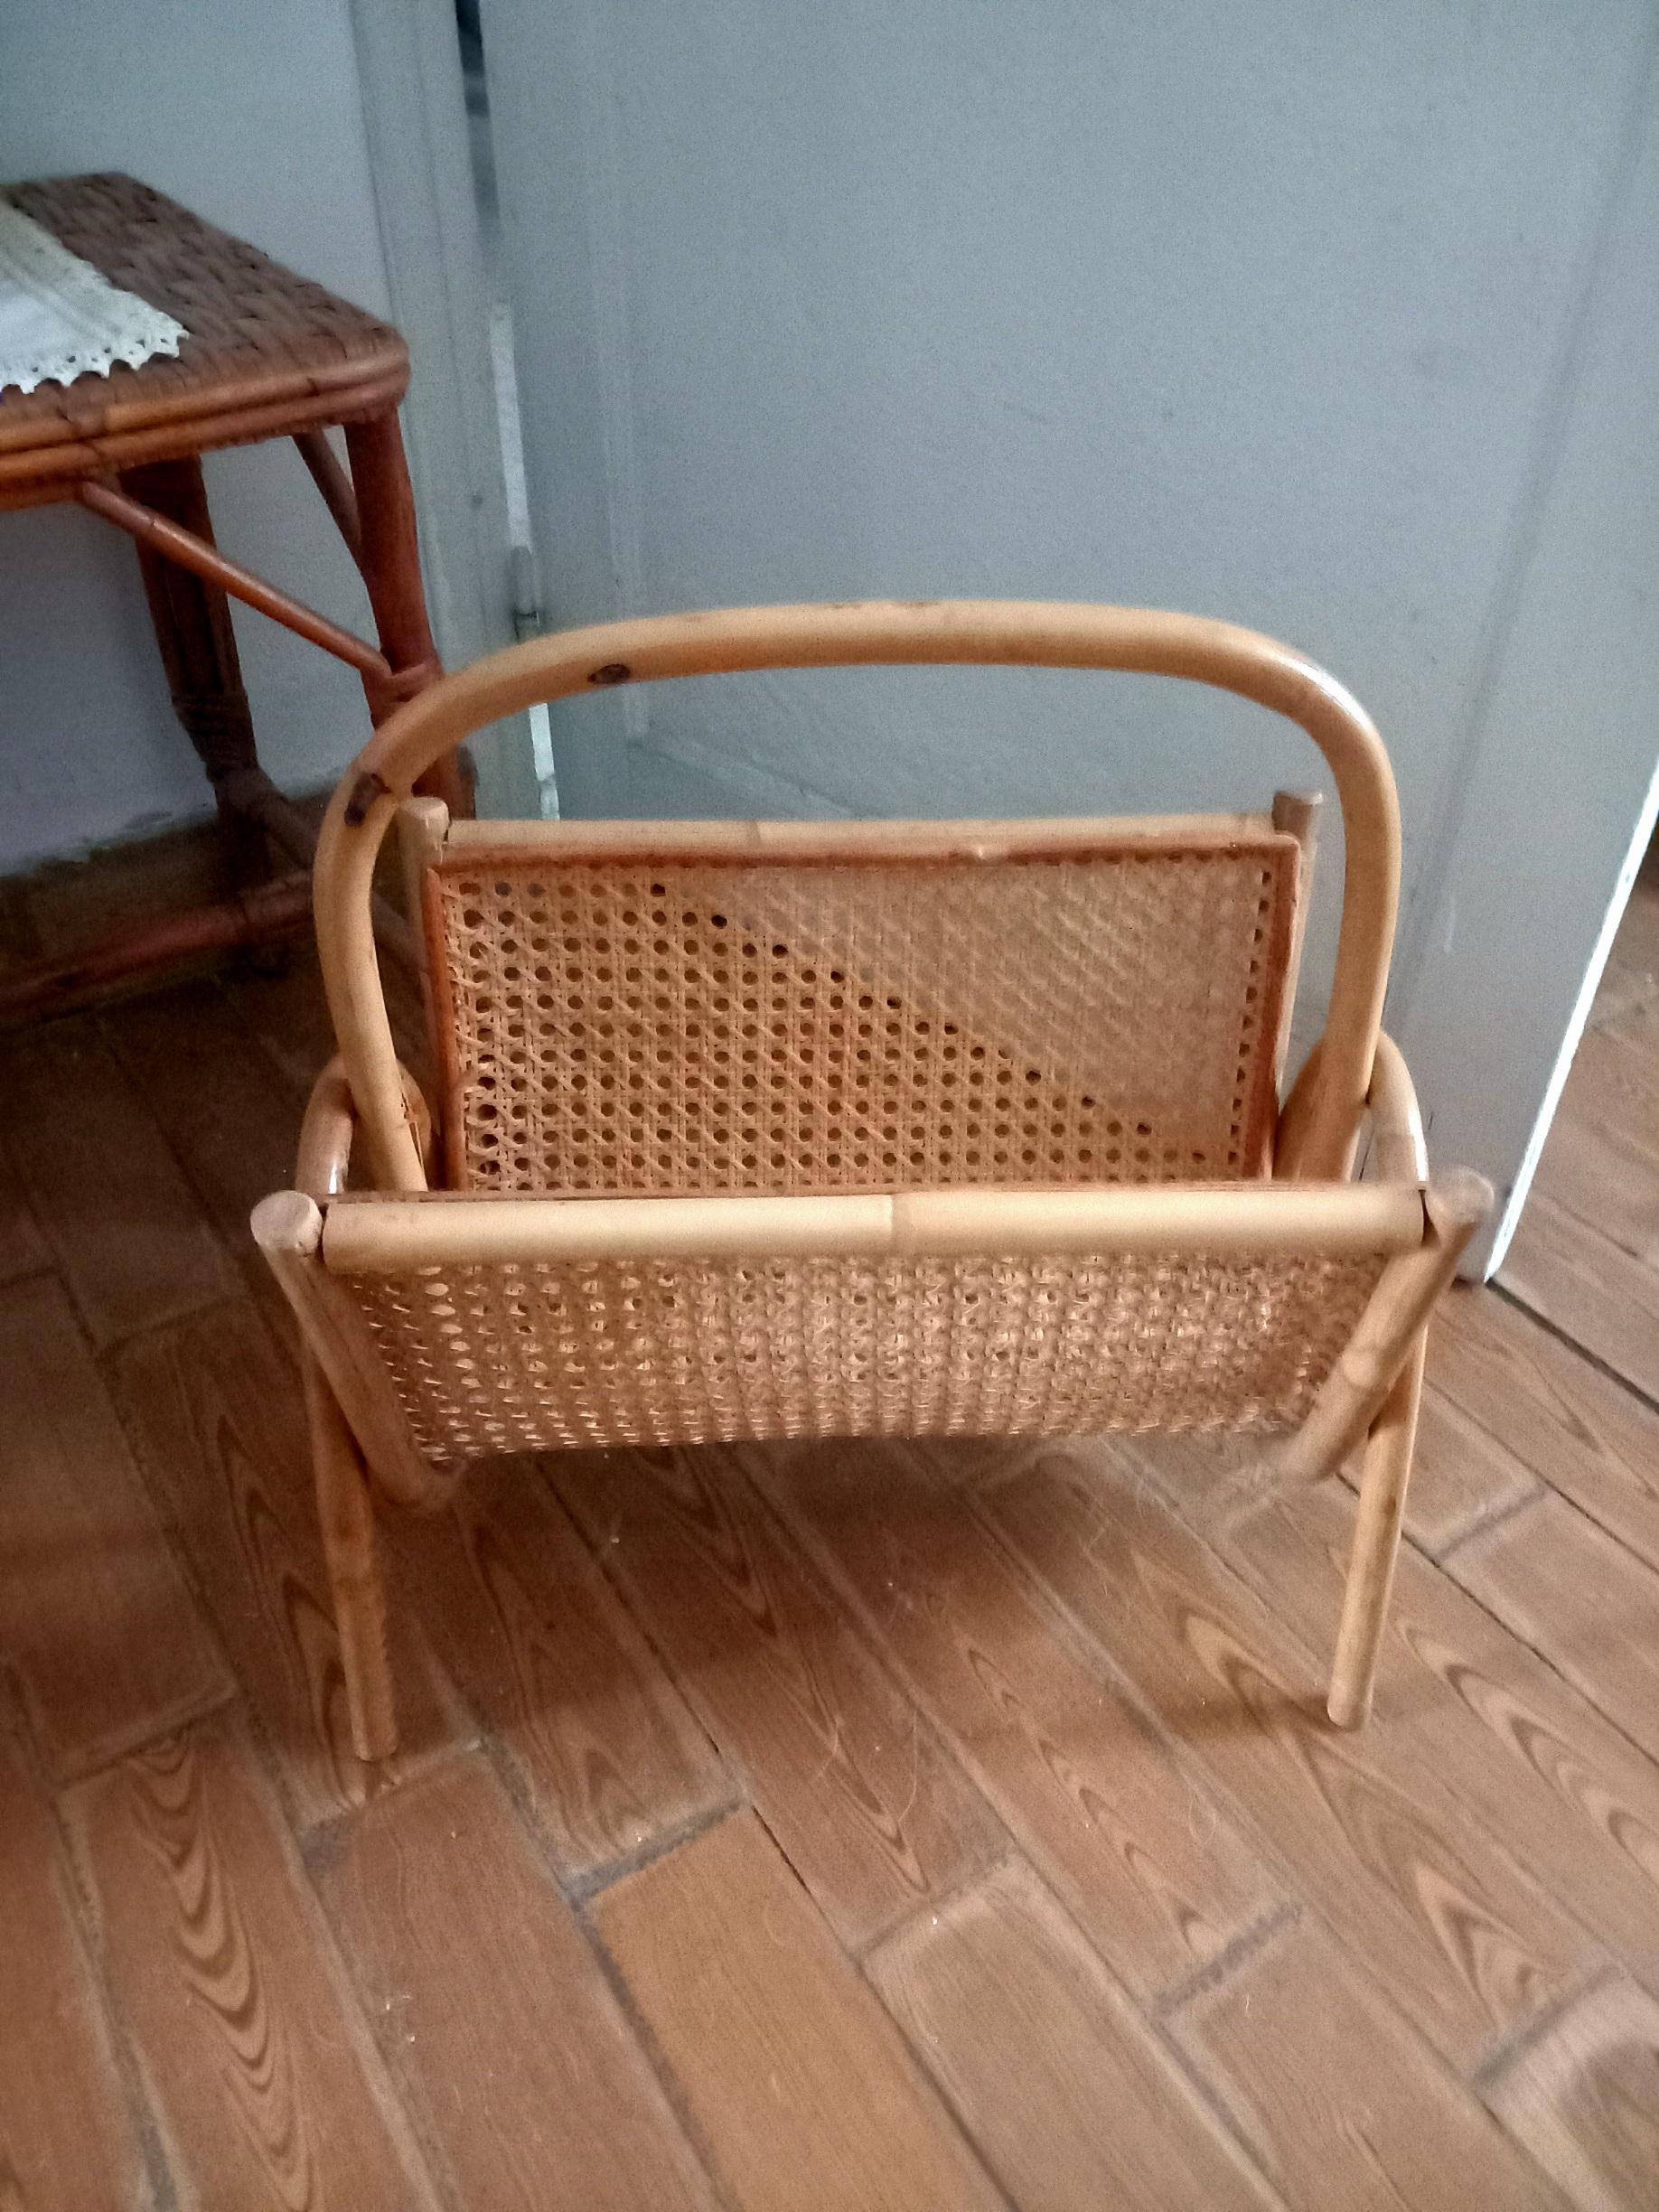 Magazine rack midcentury

Wicker and bamboo magazine rack from the 50s or 60s

Beautiful magazine rack to organize your newspapers, magazines or books on the terrace or garden or indoors in the living room. This piece of natural fiber is in